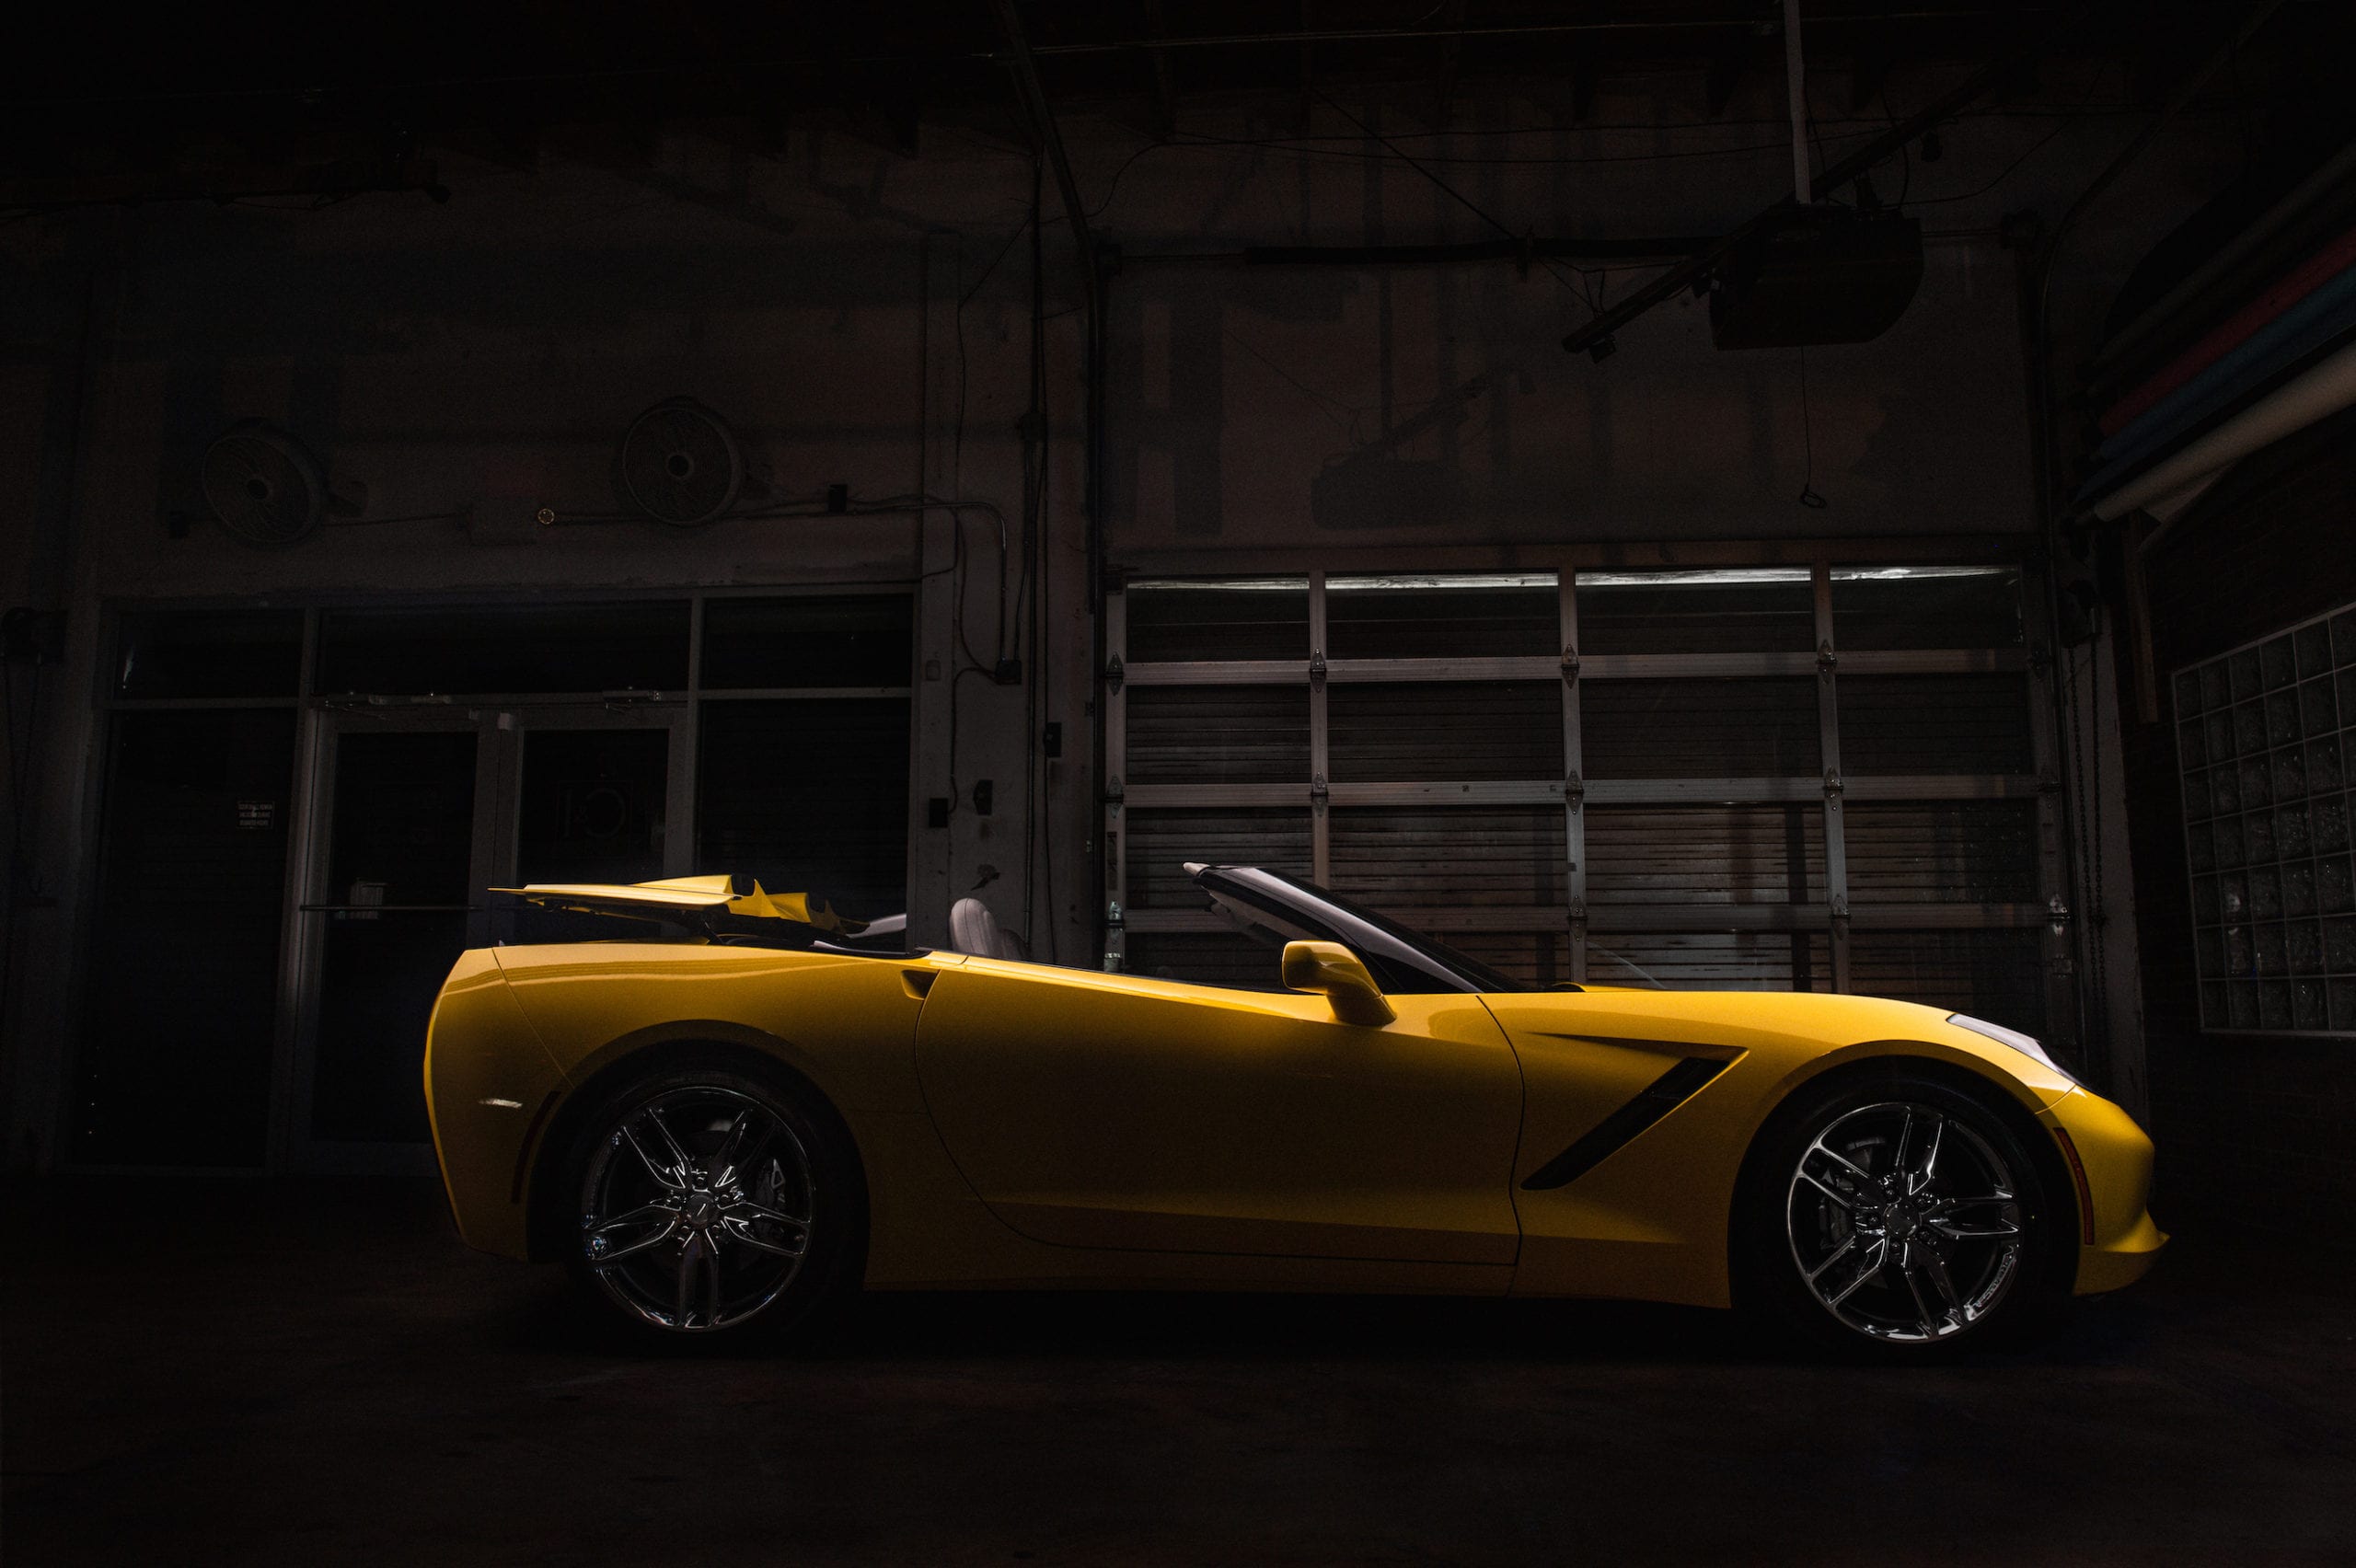 Side profile of a yellow sports car